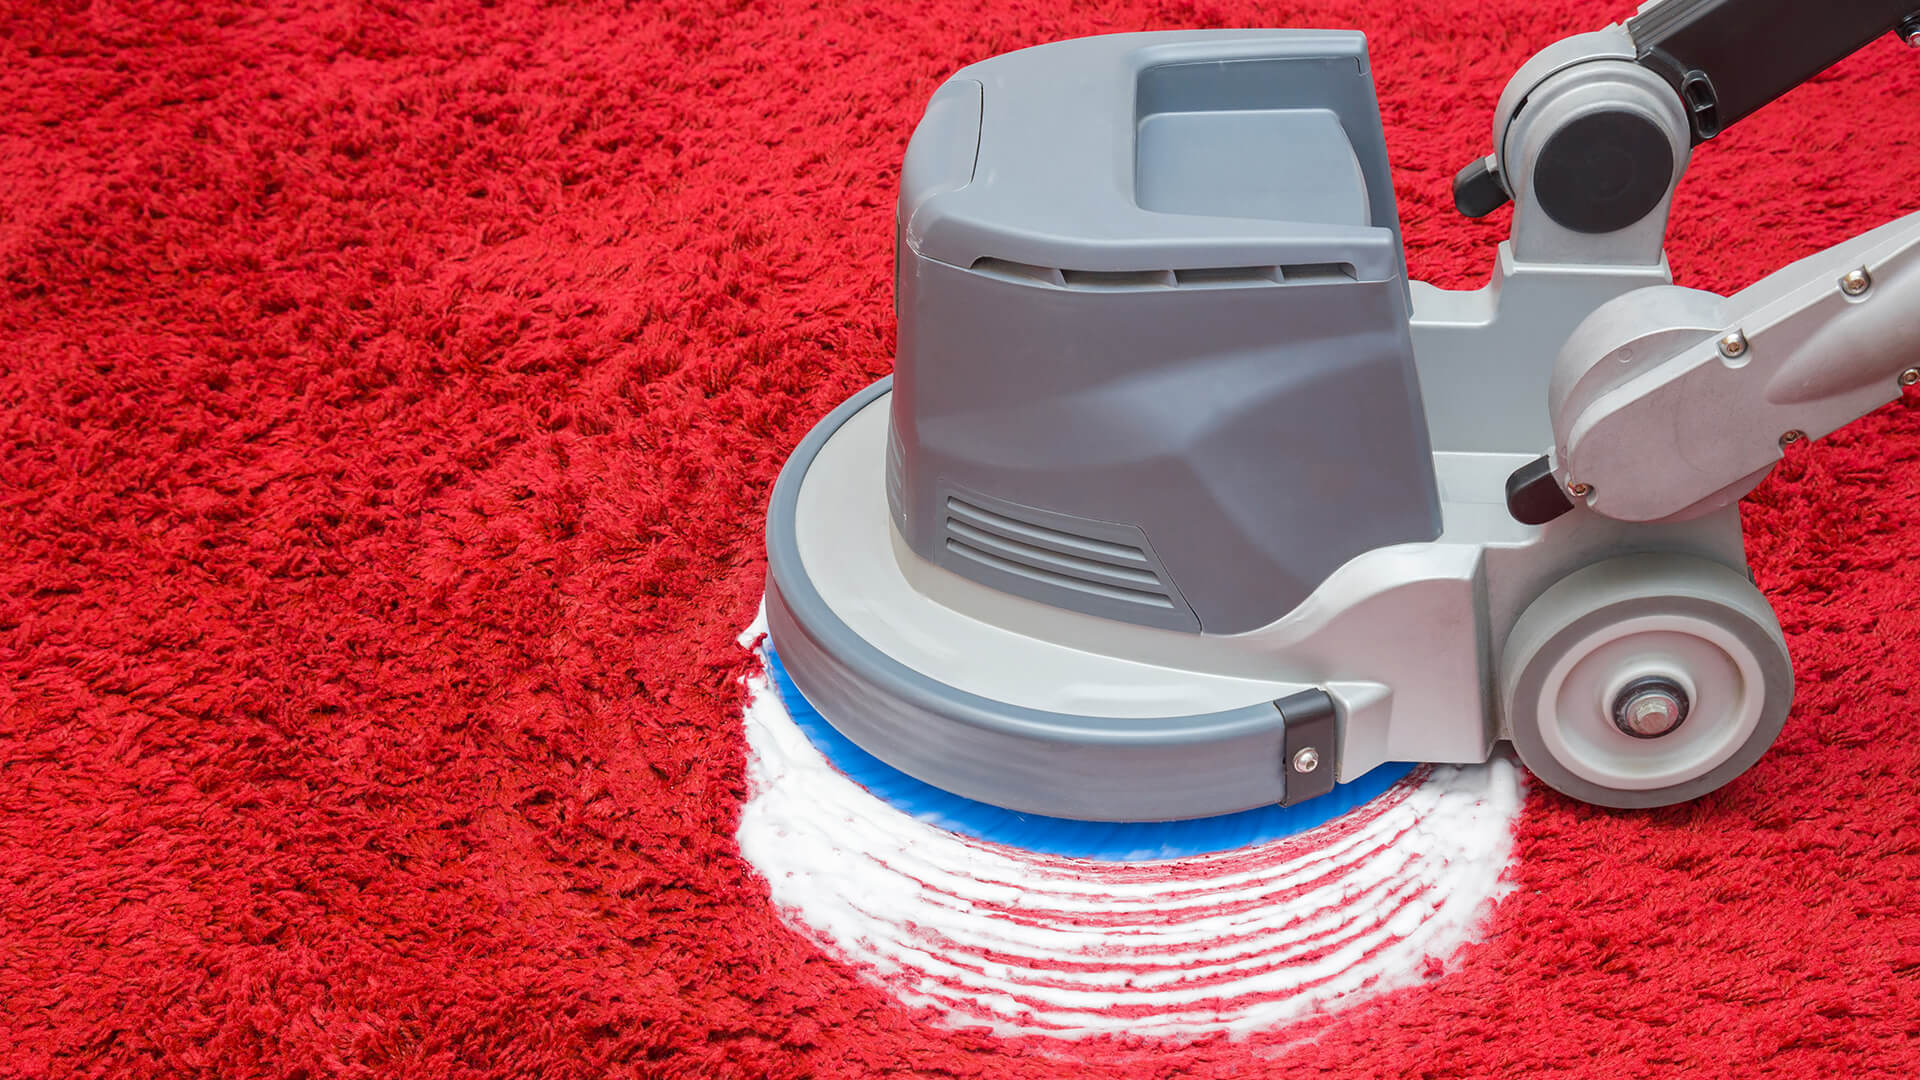 Carpet cleaning method - bonnet cleaning